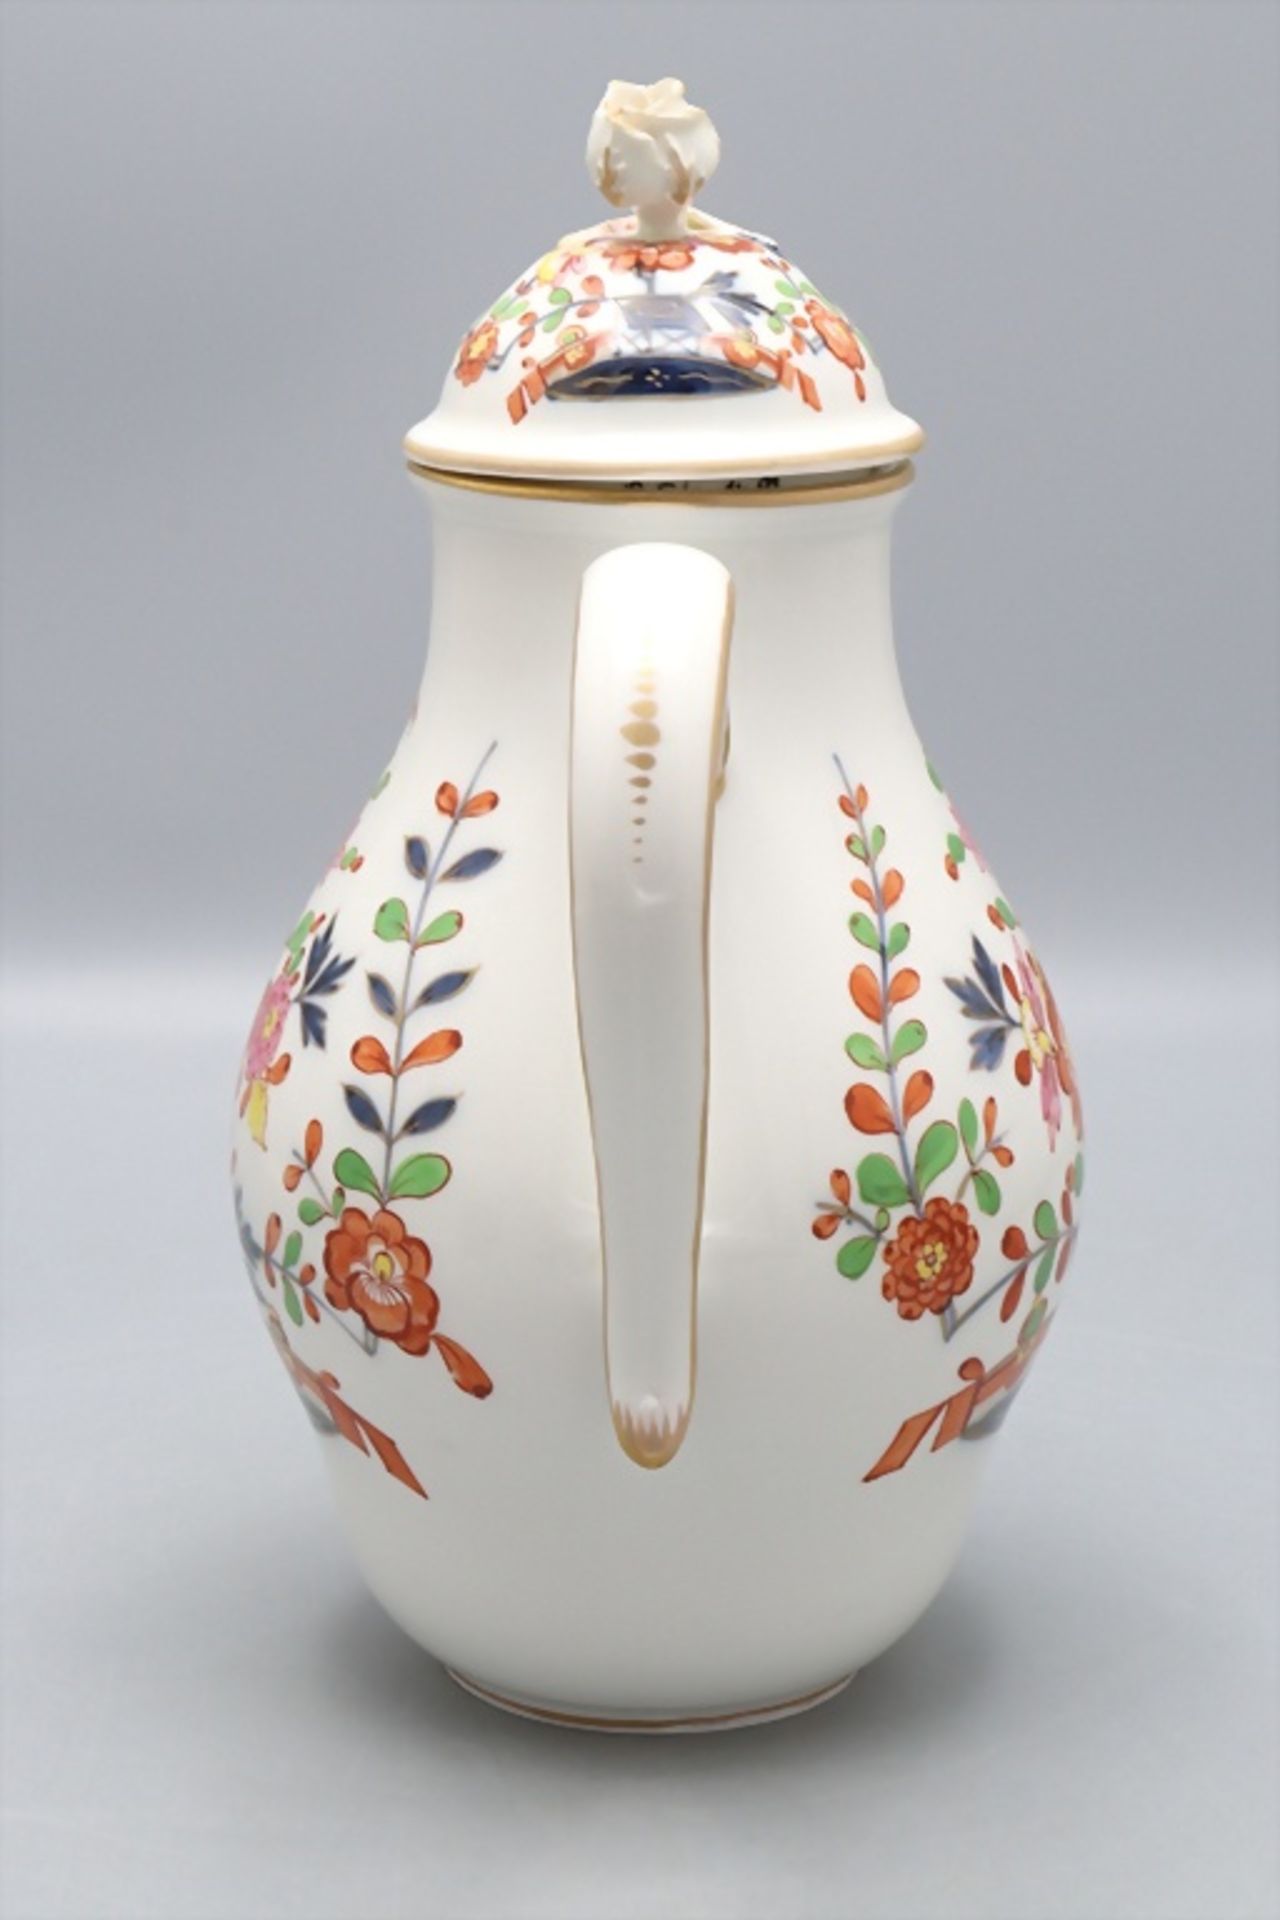 Kanne 'Indisch Purpur' / A pot with purple Indian pattern, Meissen, 1860-1924 - Image 4 of 7